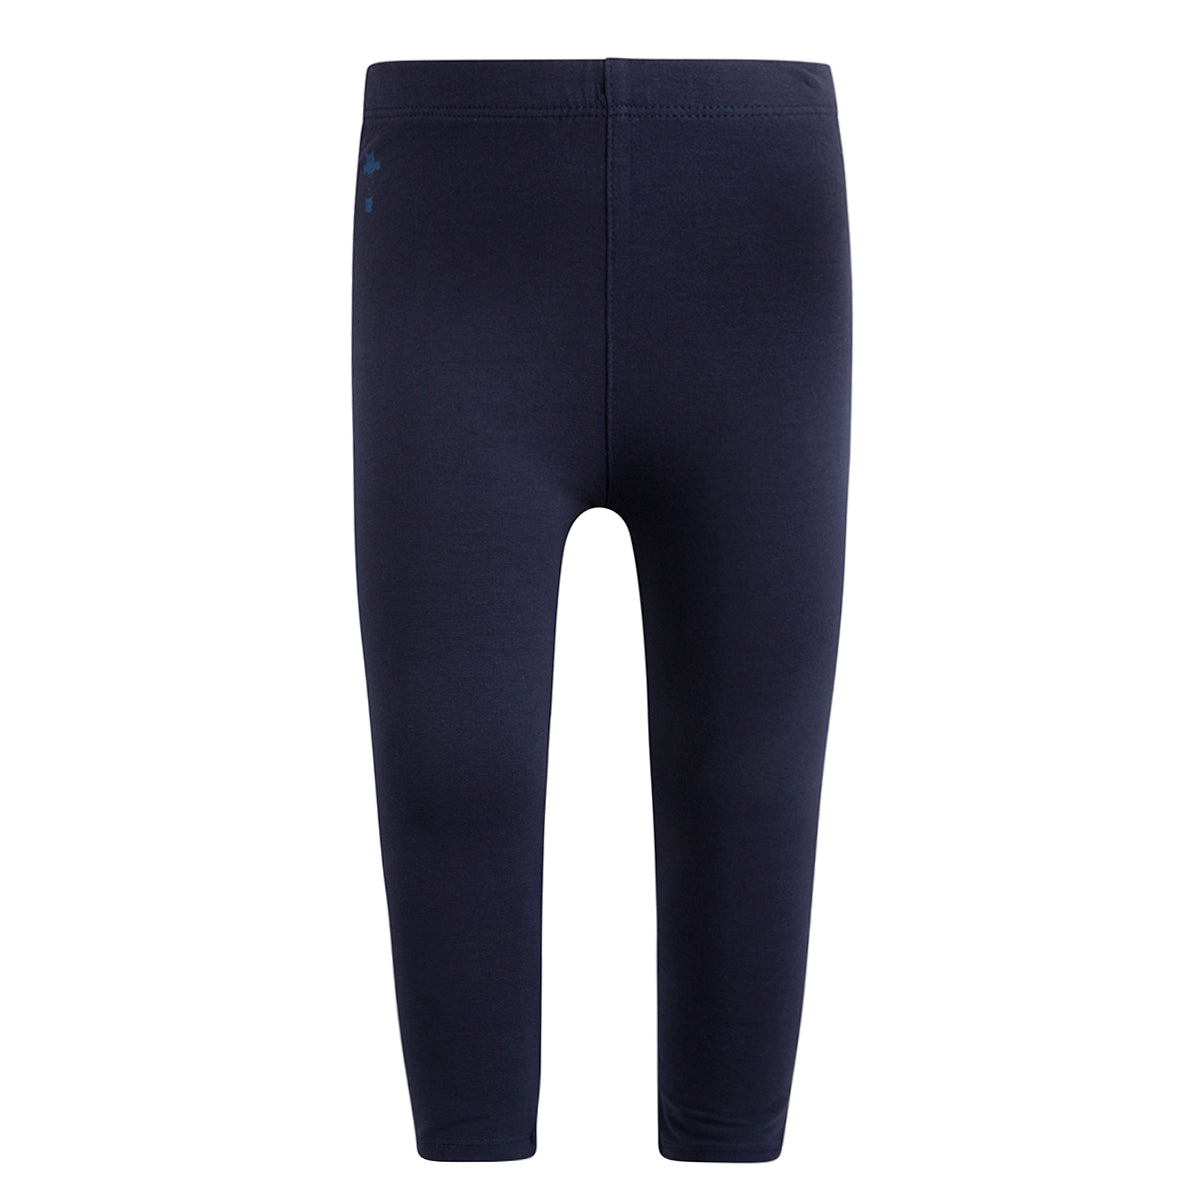 
  Basic leggings from the children's clothing line Canada House. With small logo
  printed on th...